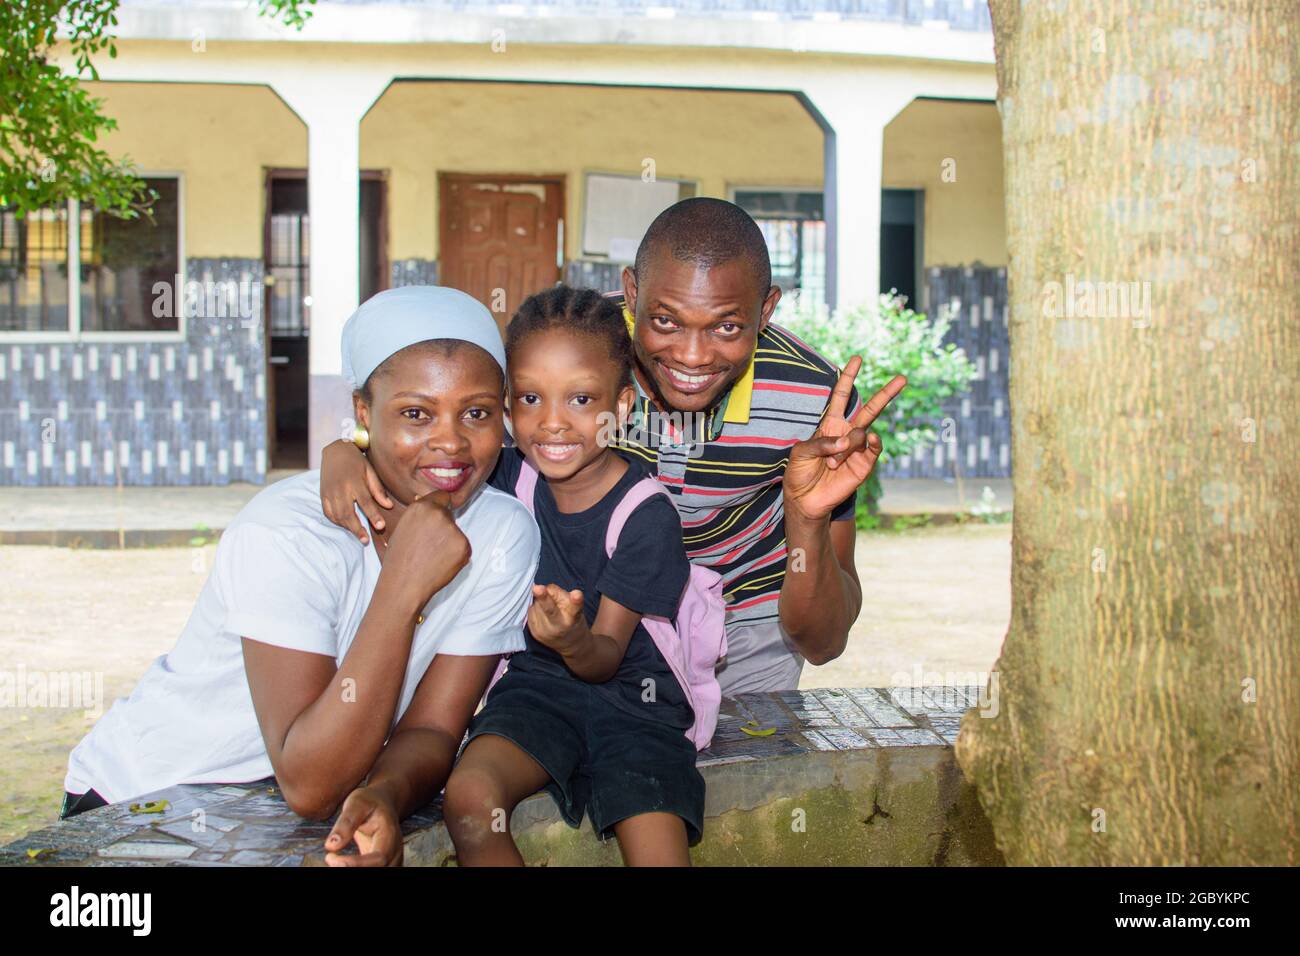 African mother and father or guardian sitting together with their daughter in a school environment, available to help the girl child attain excellence Stock Photo